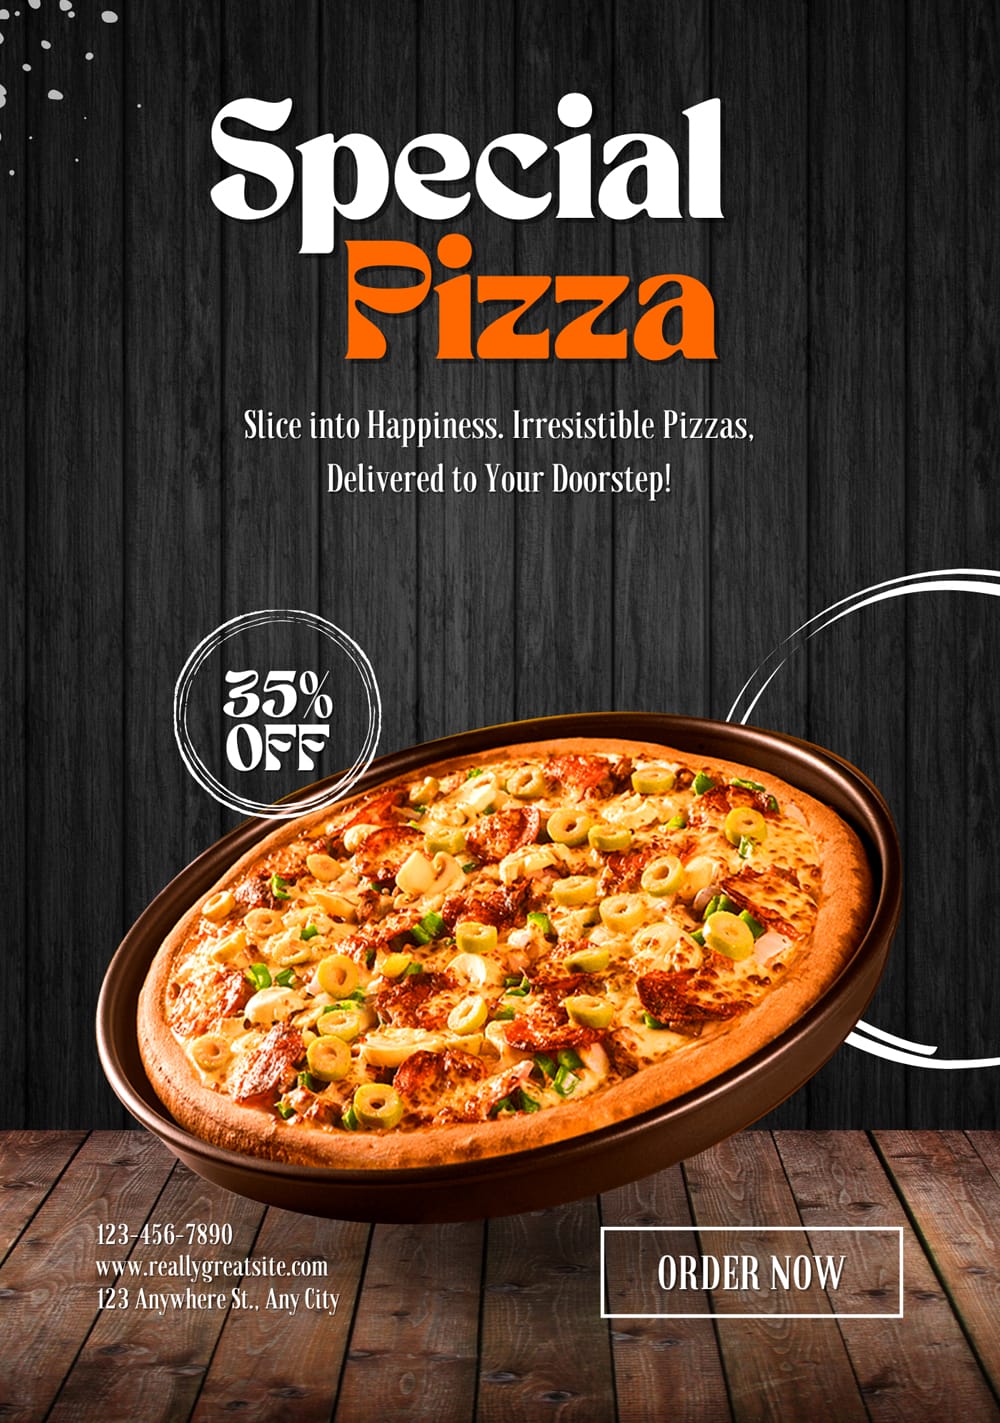 Orange and White Modern Special Pizza Flyer Template